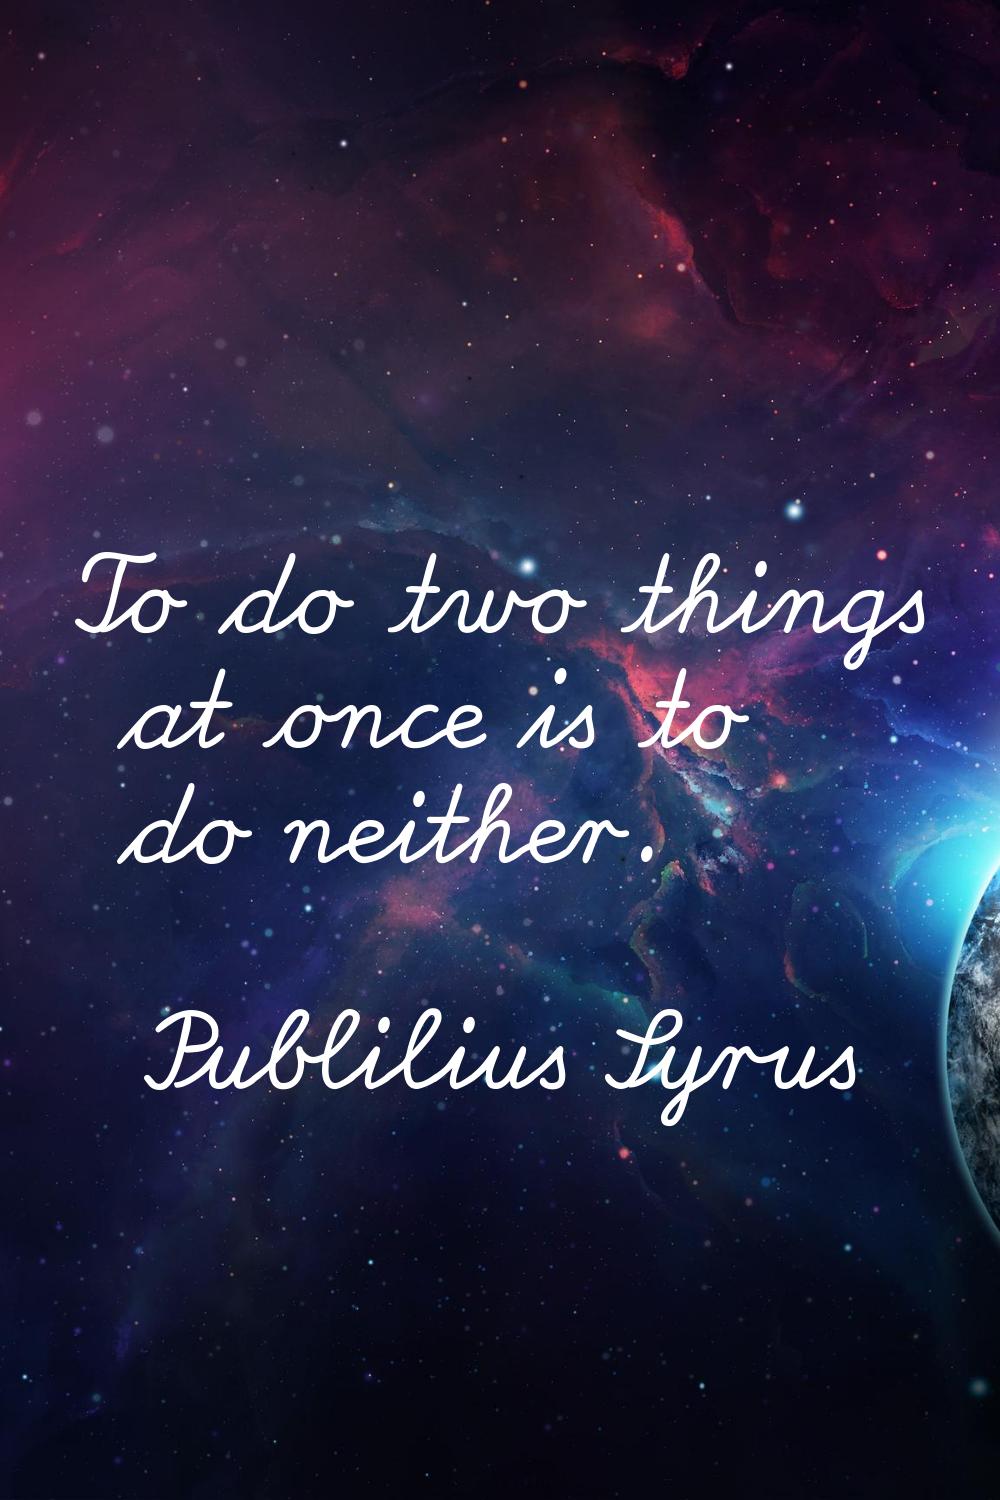 To do two things at once is to do neither.